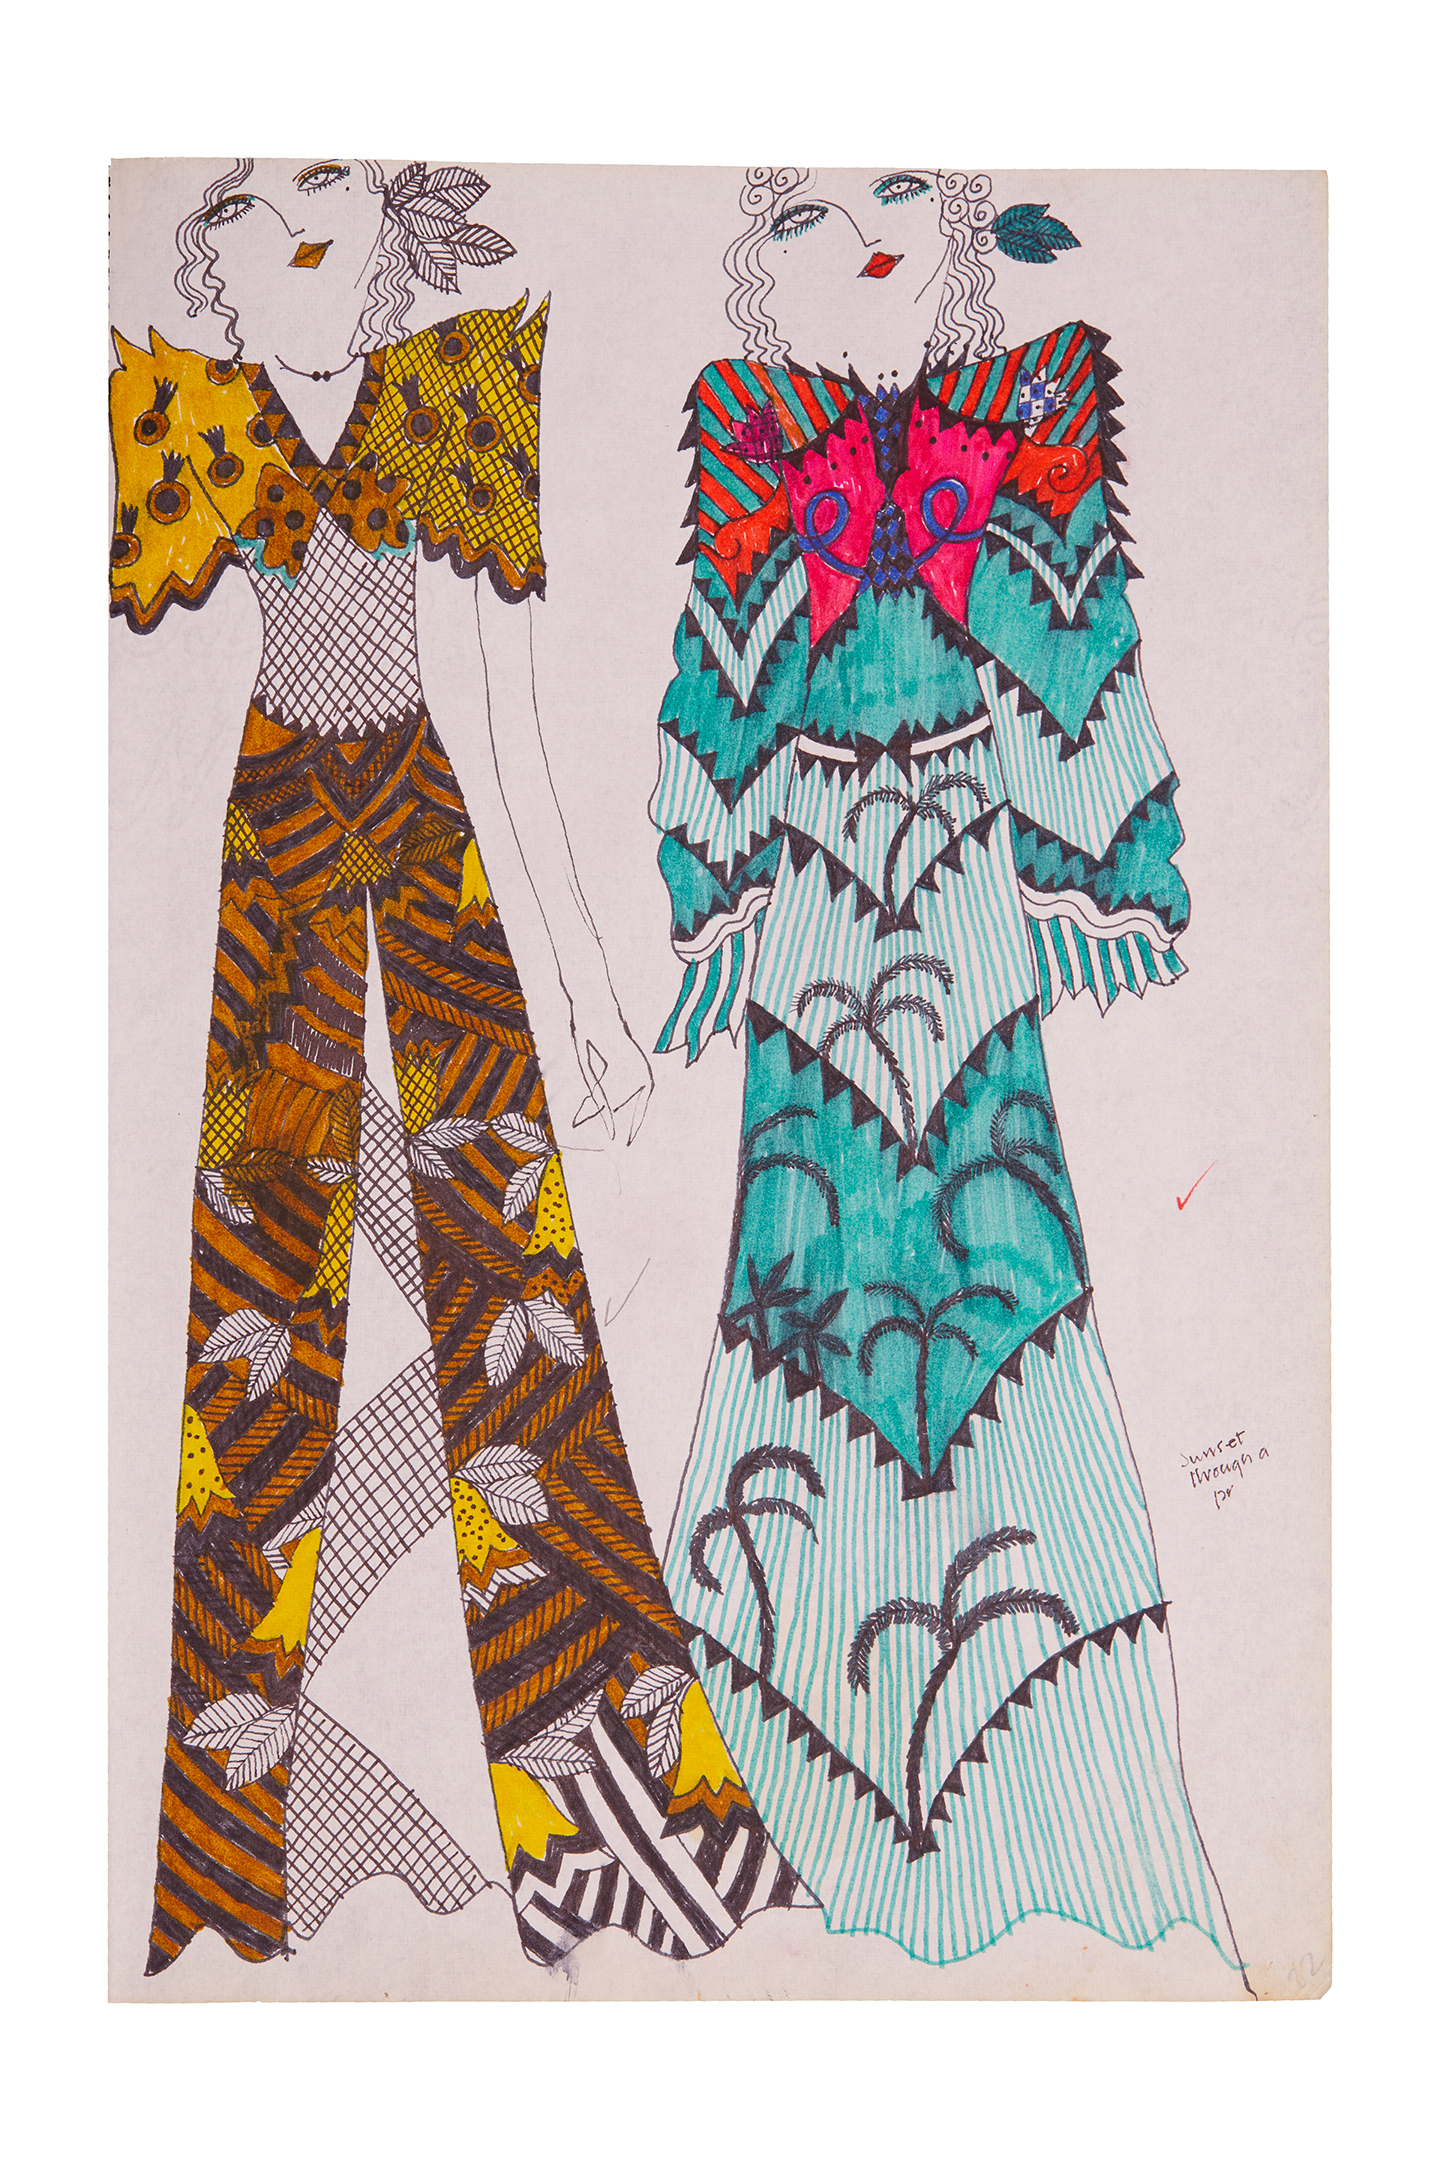 Celia sketchbook with some of her iconic designs and other patchworks of prints, 1968-70, Collection Celia Birtwell